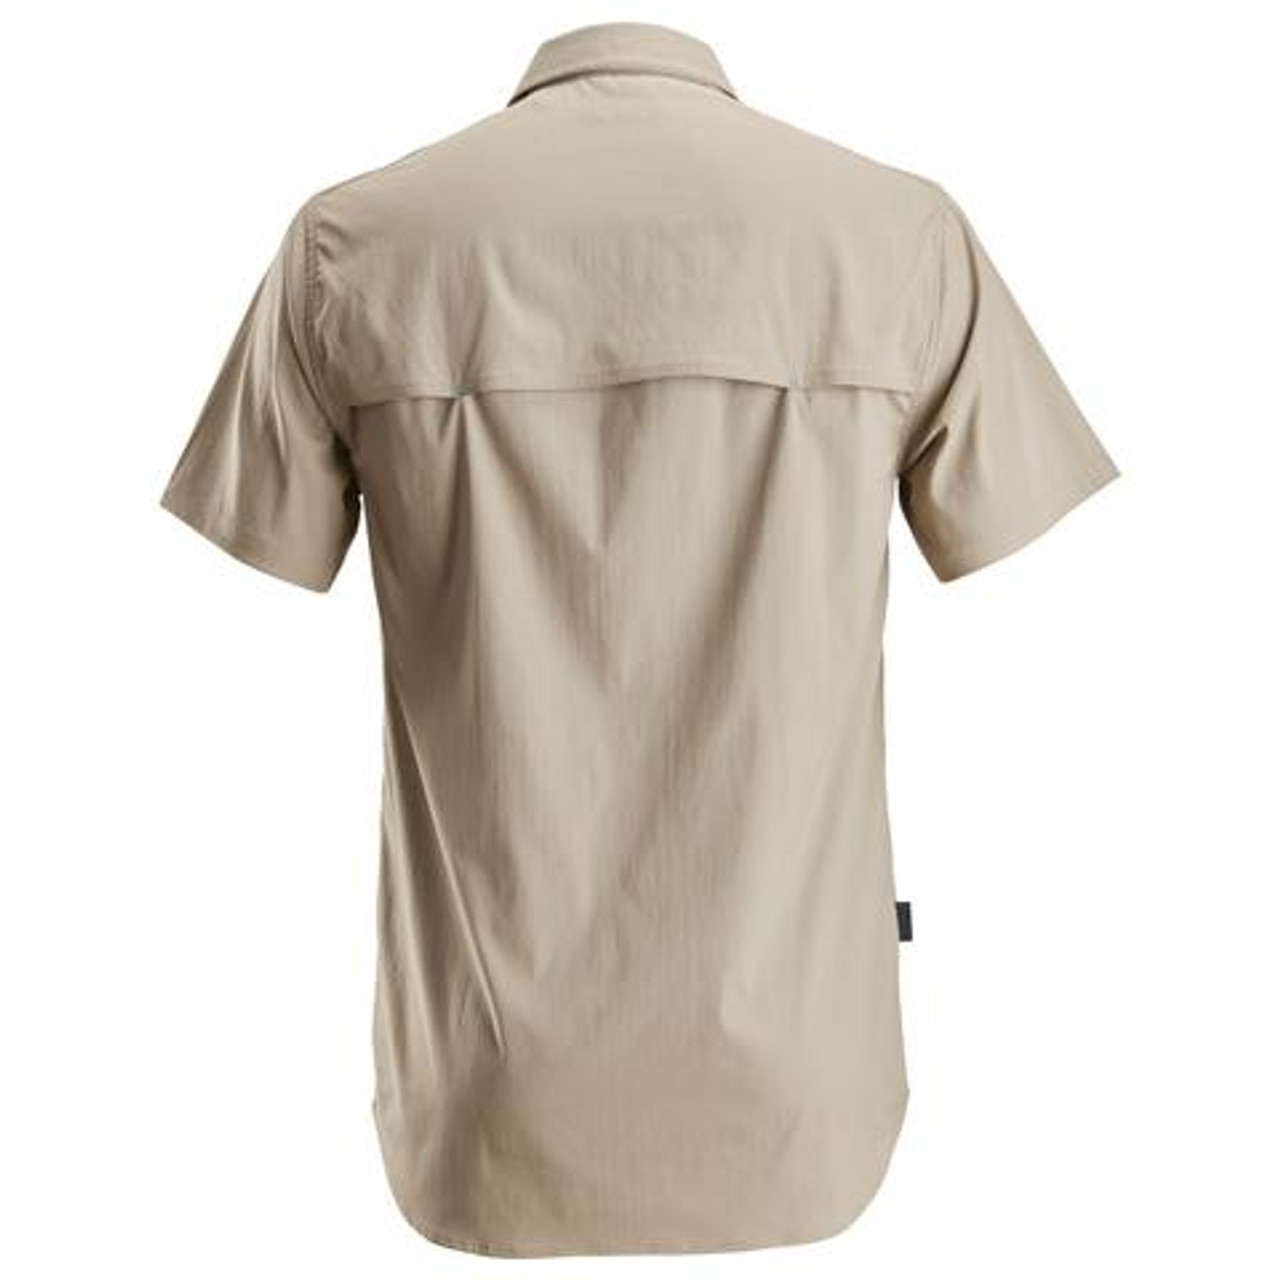 Buy Online SNICKERS Khaki Shirt with Short Sleeves for the Construction Industry and Operators in Perth, Sydney and Brisbane